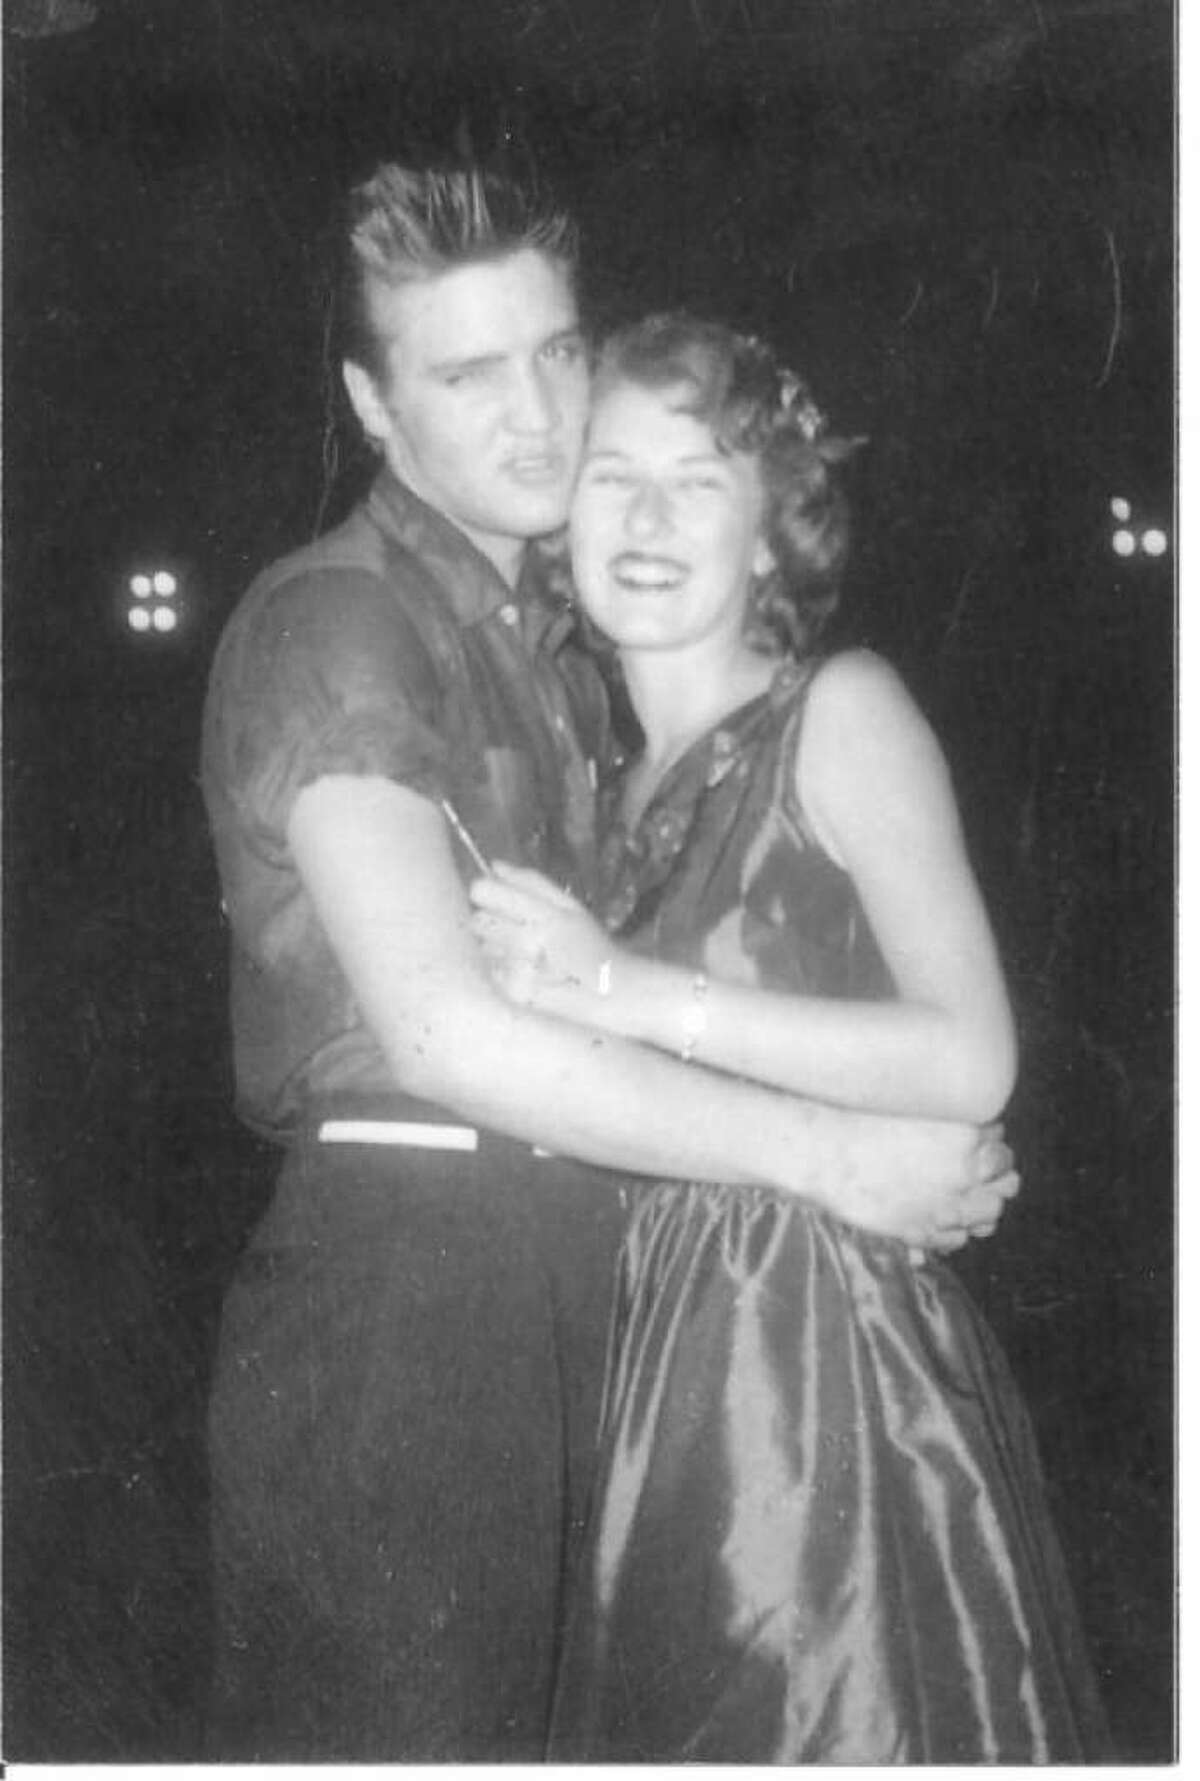 A young Mary McCoy pictured with Elvis Presley when the two perform on The Louisiana Hayride Tour in 1955.